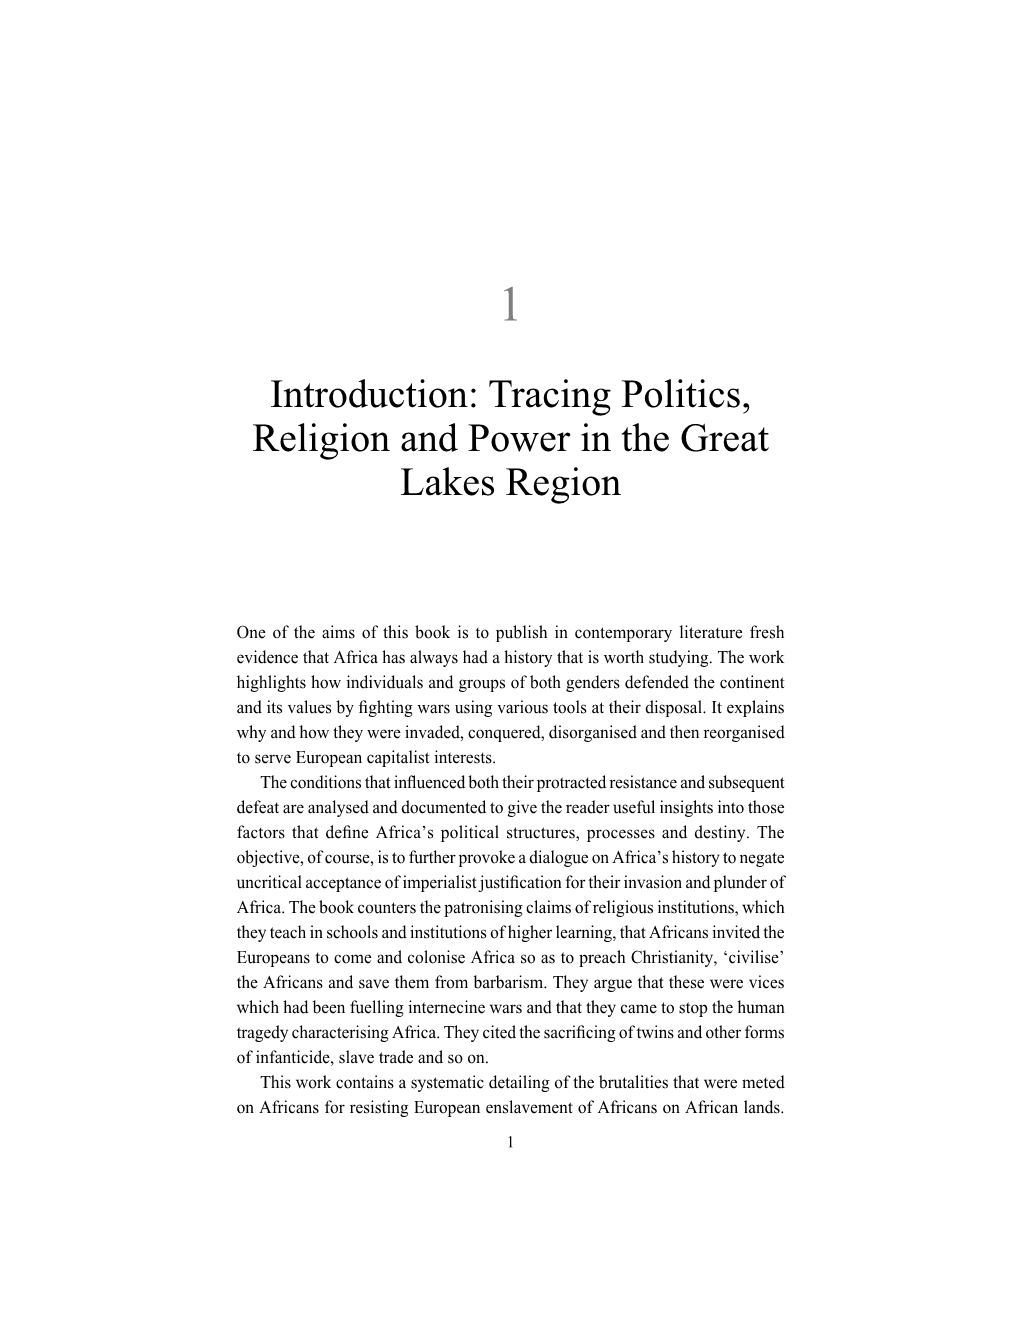 Introduction: Tracing Politics, Religion and Power in the Great Lakes Region